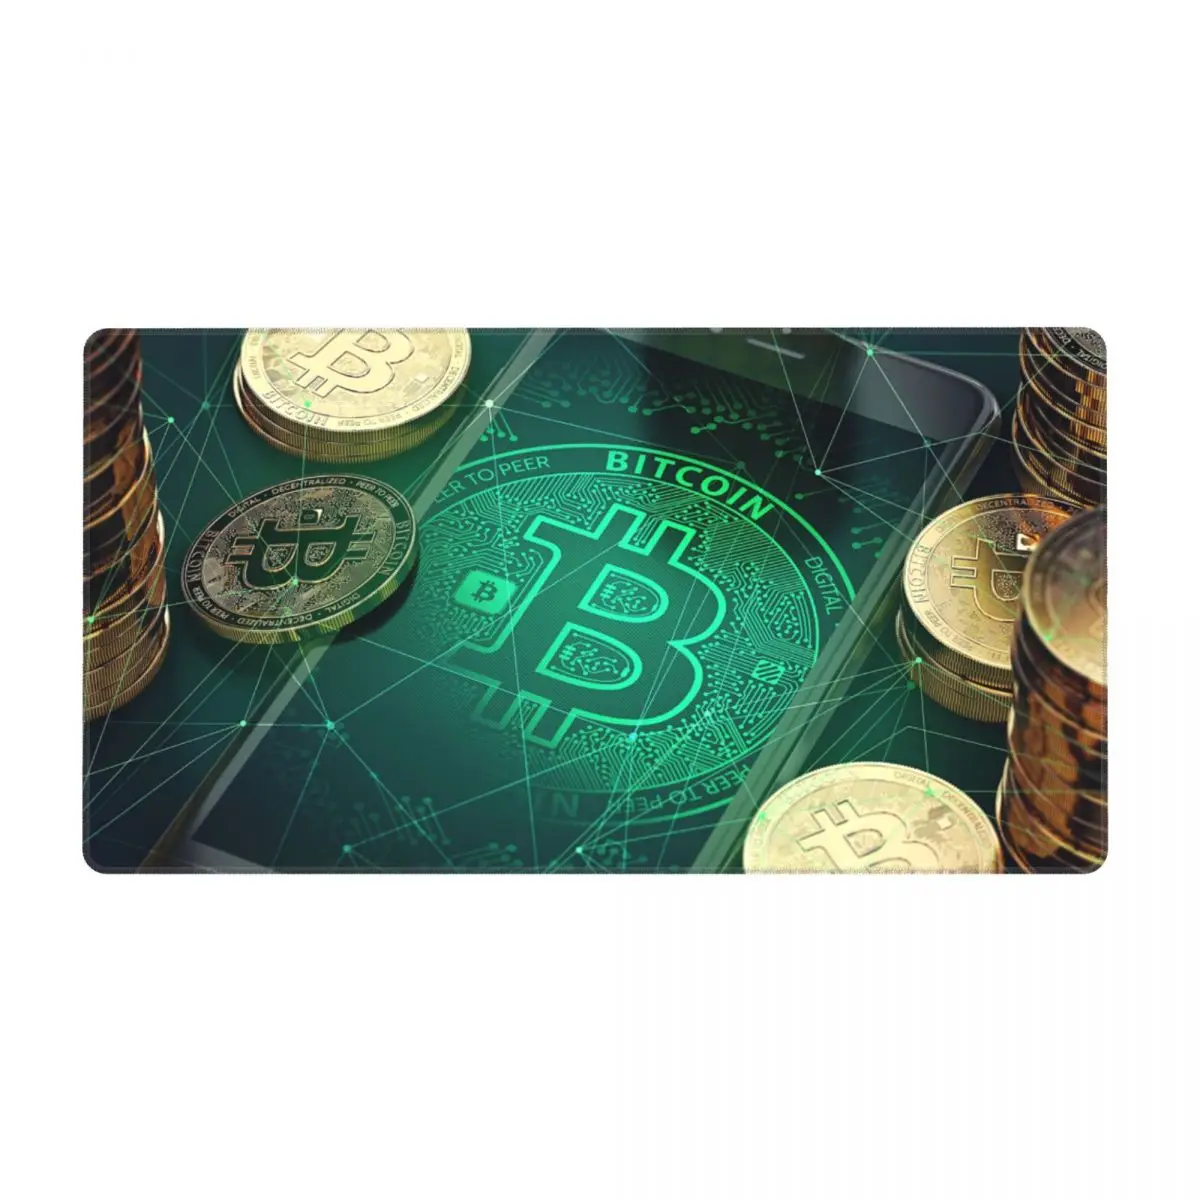 

Bitcoin BTC Crypto Coin Gaming Mouse Pad Keyboard Mouse Mat Large Fabric Mousepad for Gamers